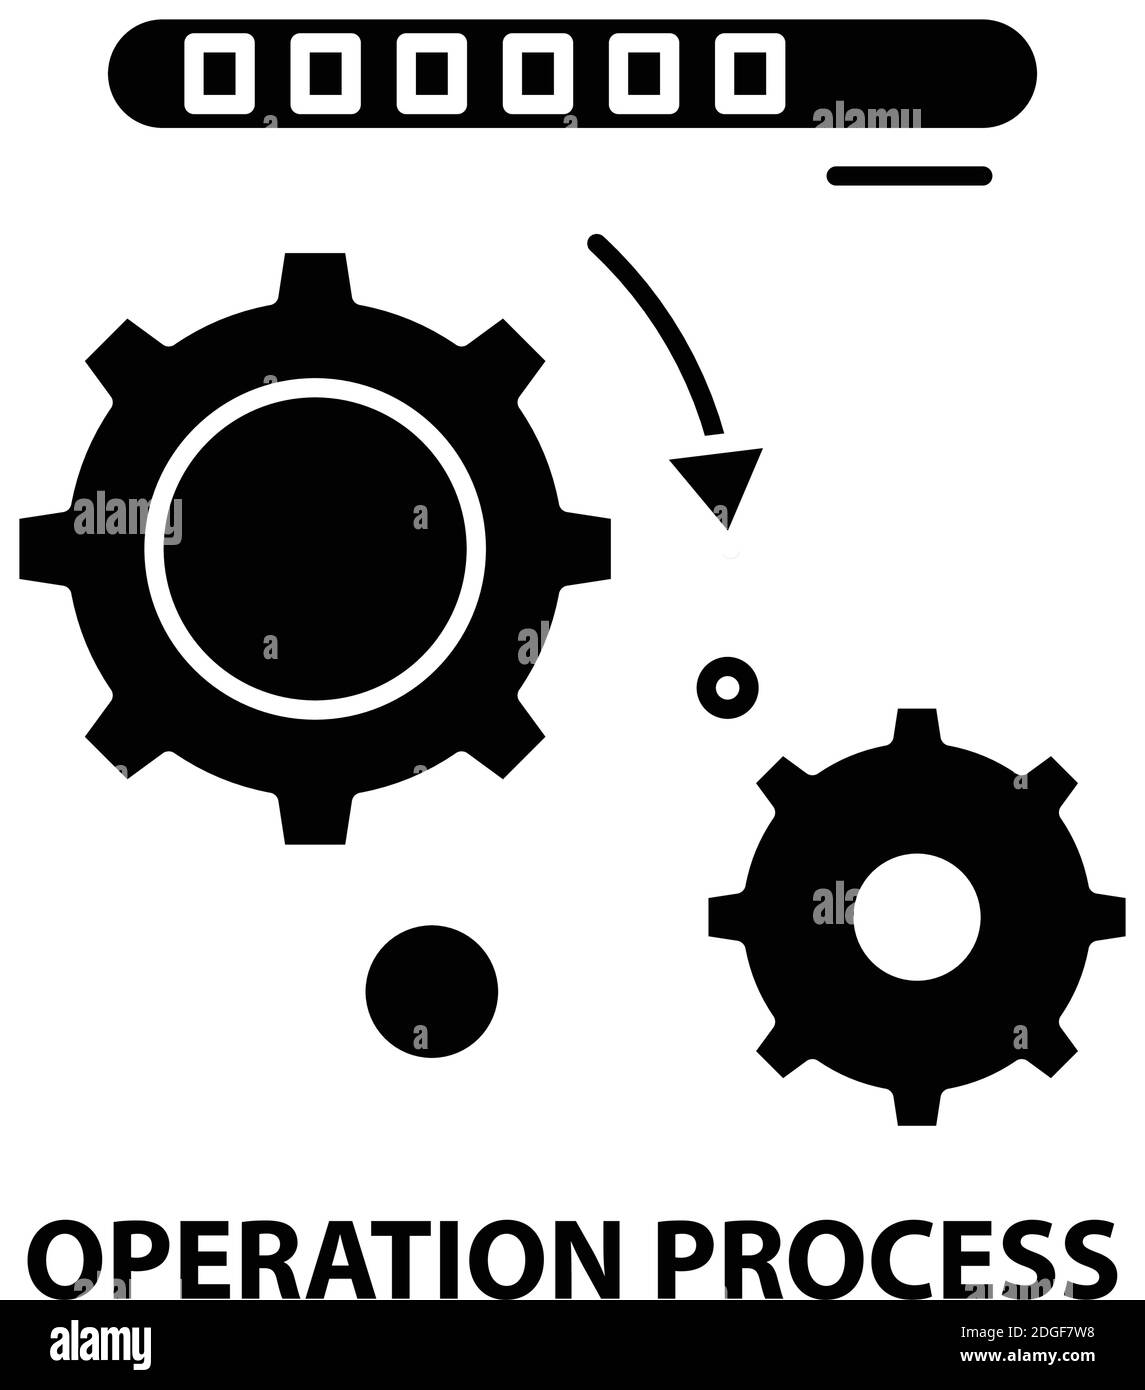 operation process icon, black vector sign with editable strokes, concept illustration Stock Vector